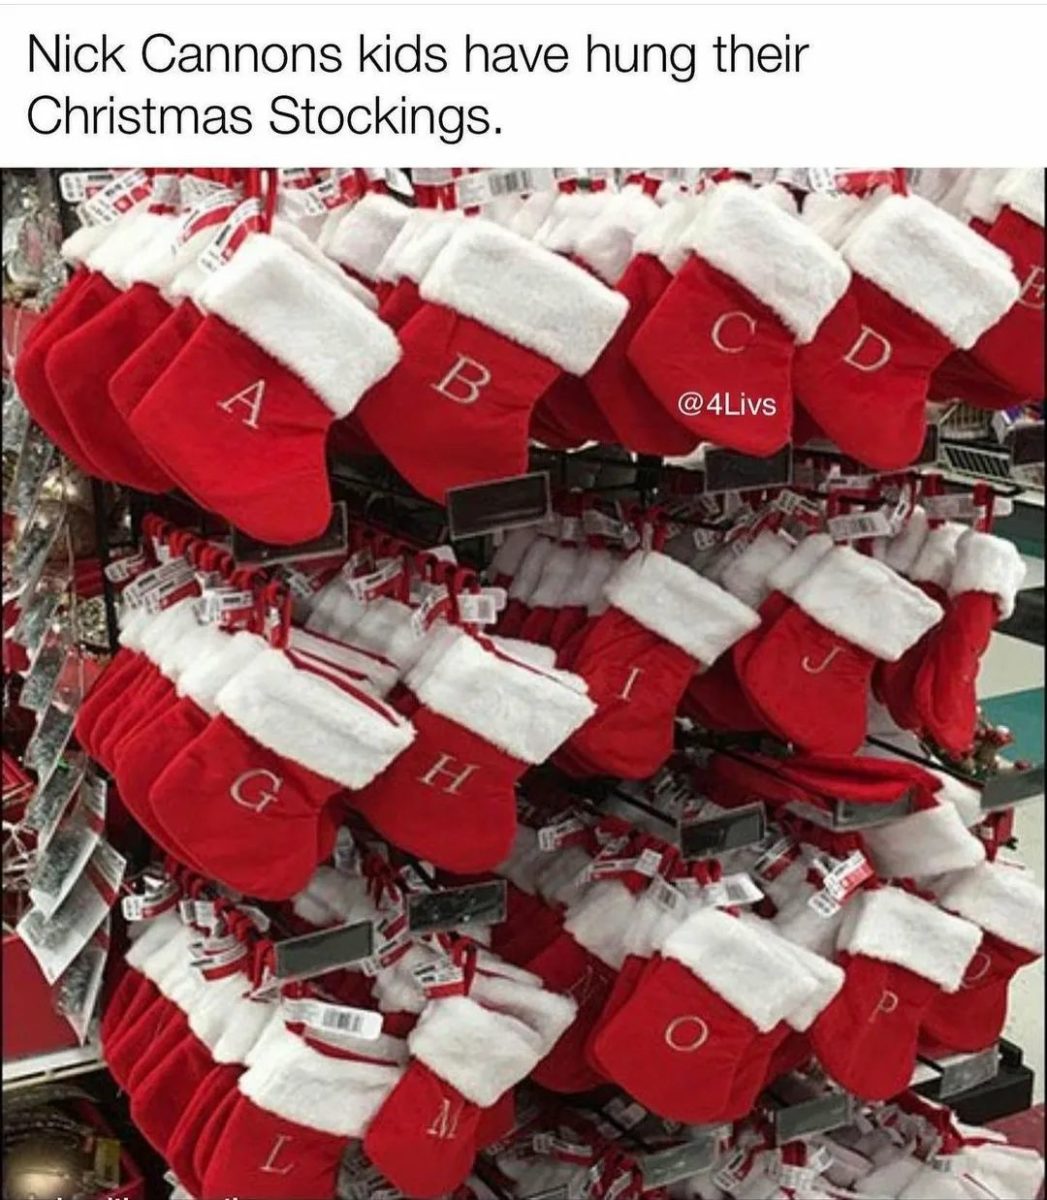 25 Funny Christmas Memes That Will Make You Feel Better If You're Stressed Over the Holidays | Enjoy some holiday humor with these hilarious Christmas memes.